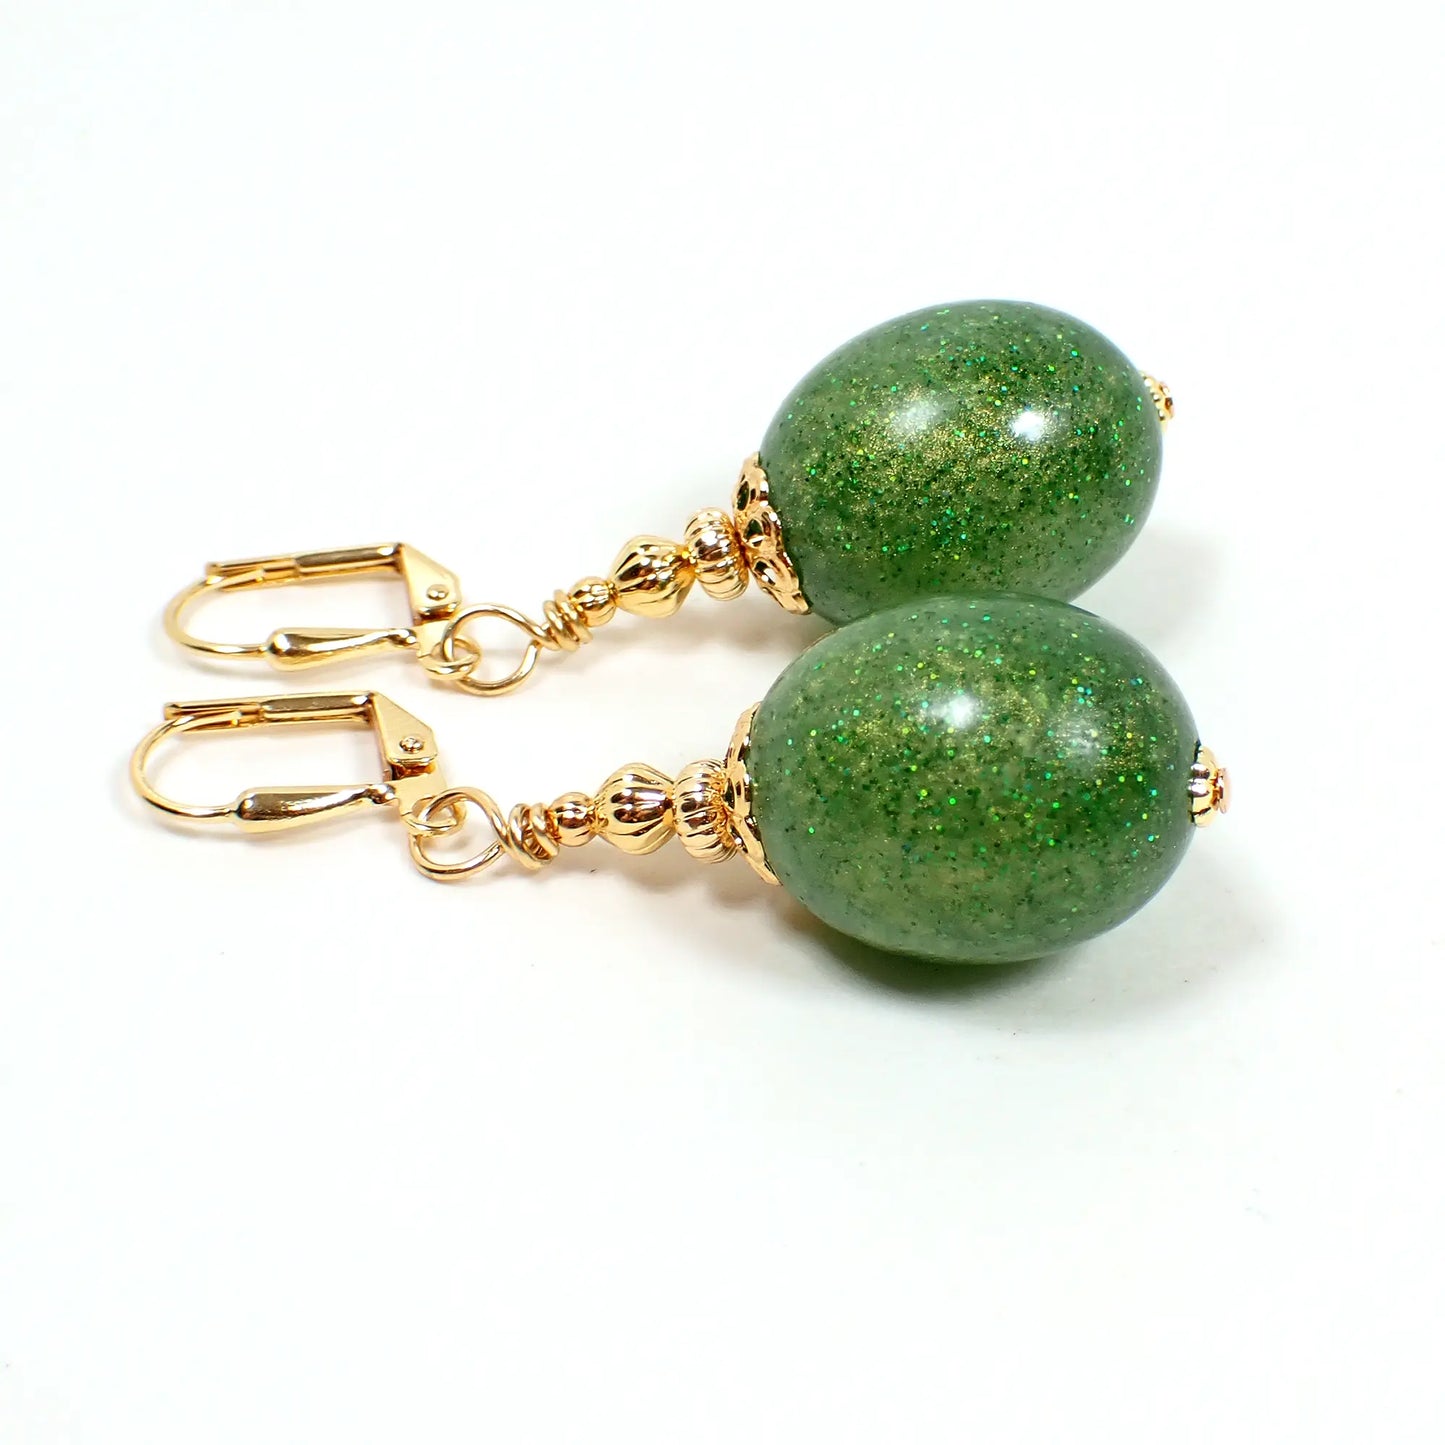 Handmade Green Glitter Resin Oval Drop Earrings Gold Plated Hook Lever Back or Clip On